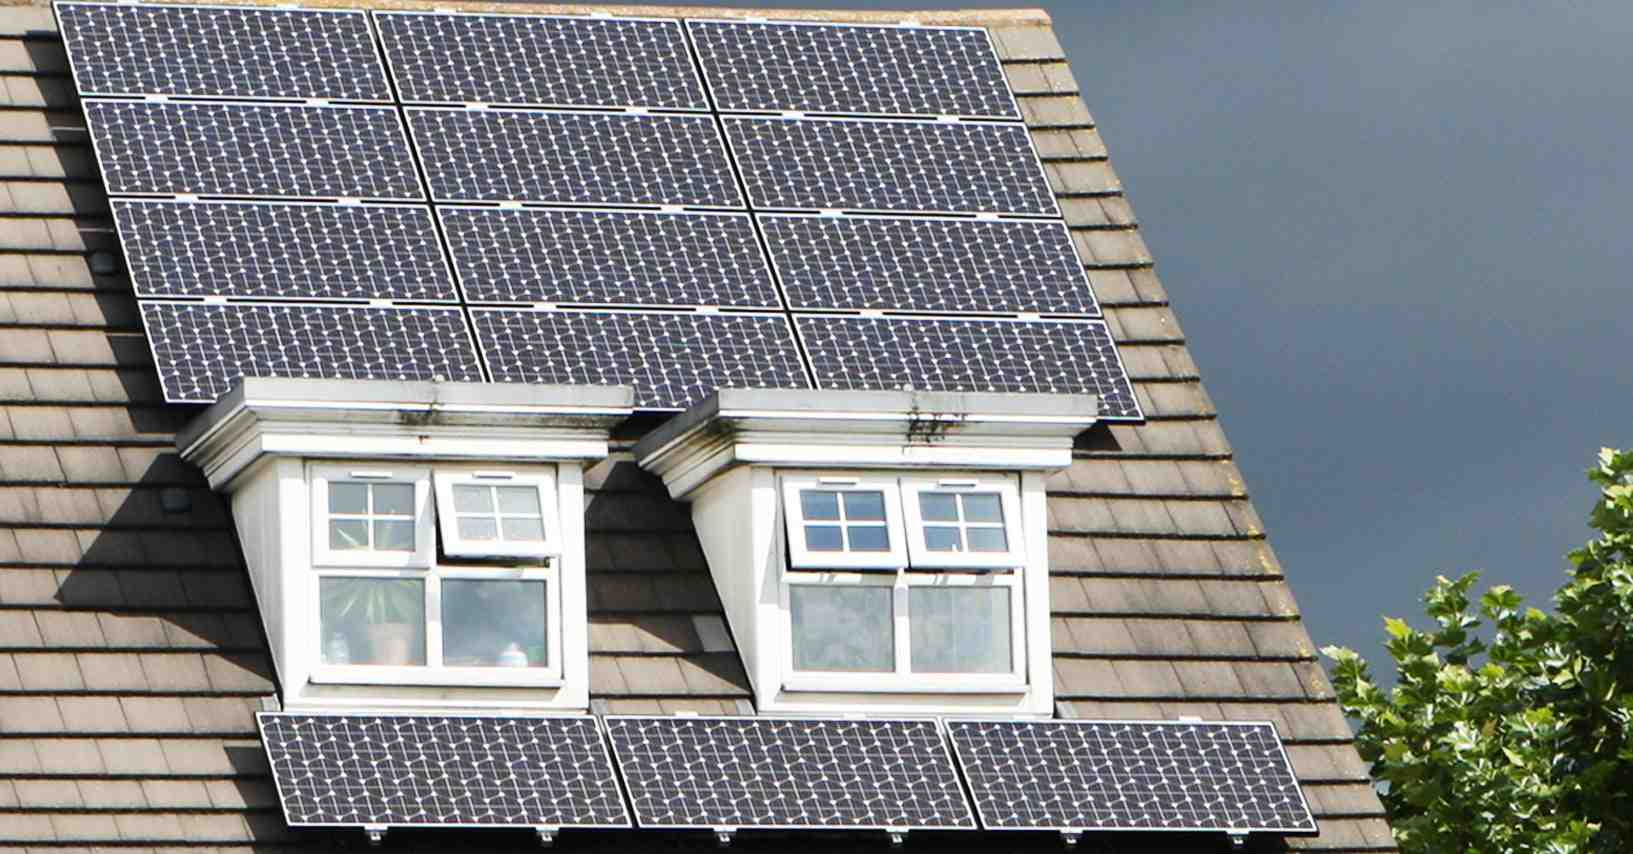 How much does 25 solar panels cost?